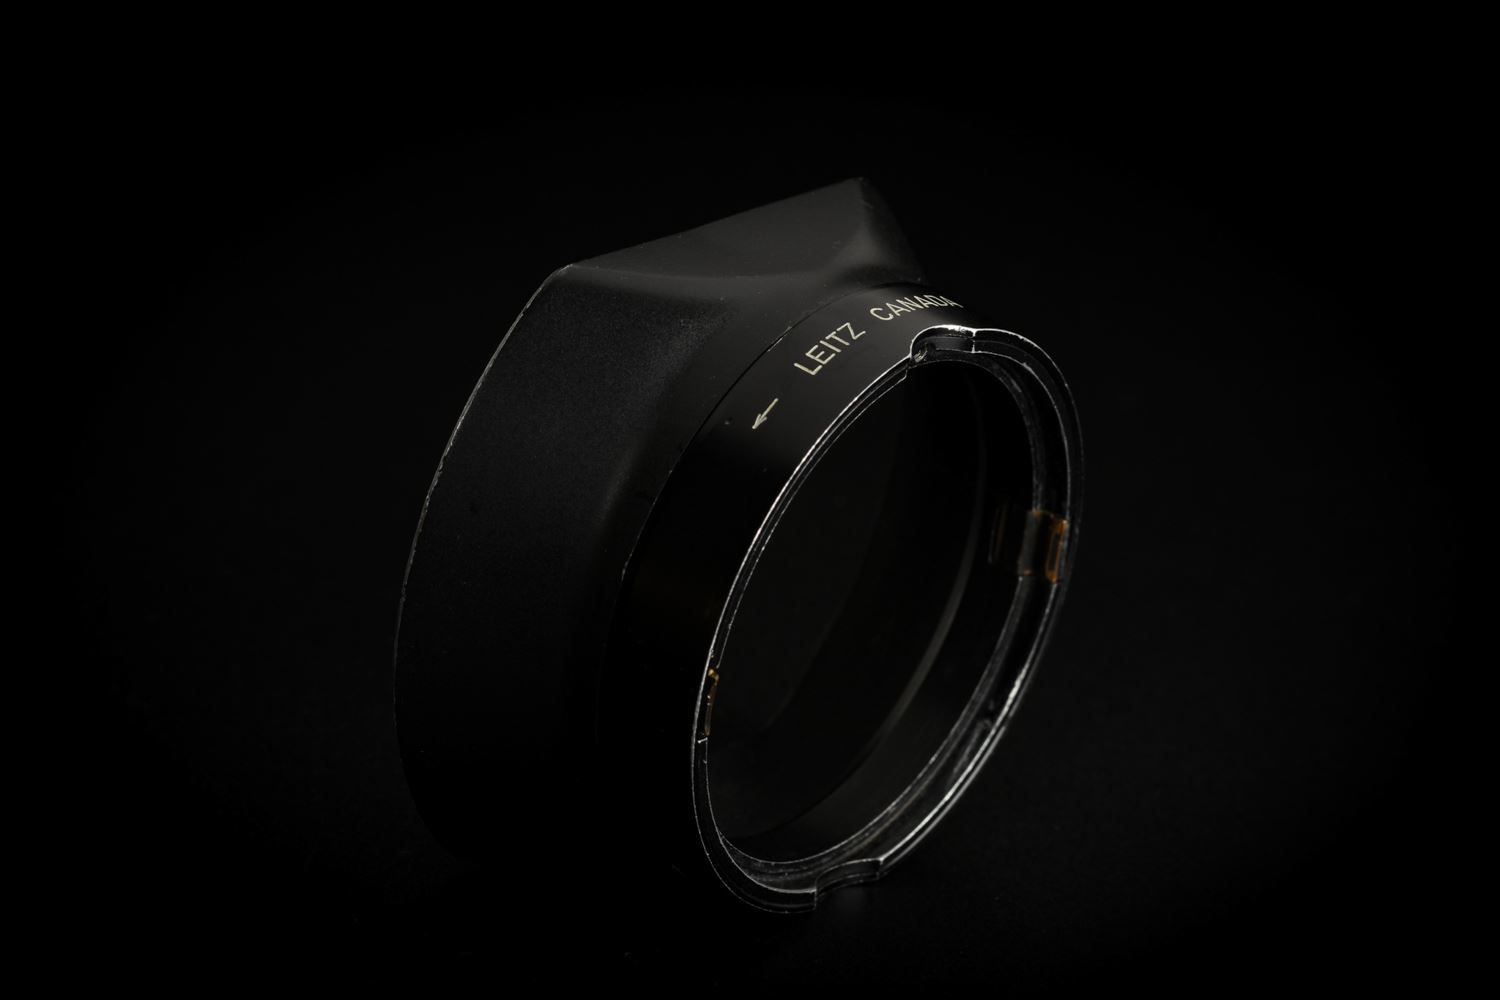 Picture of Leica 12522H/OLLUX Lens Hood